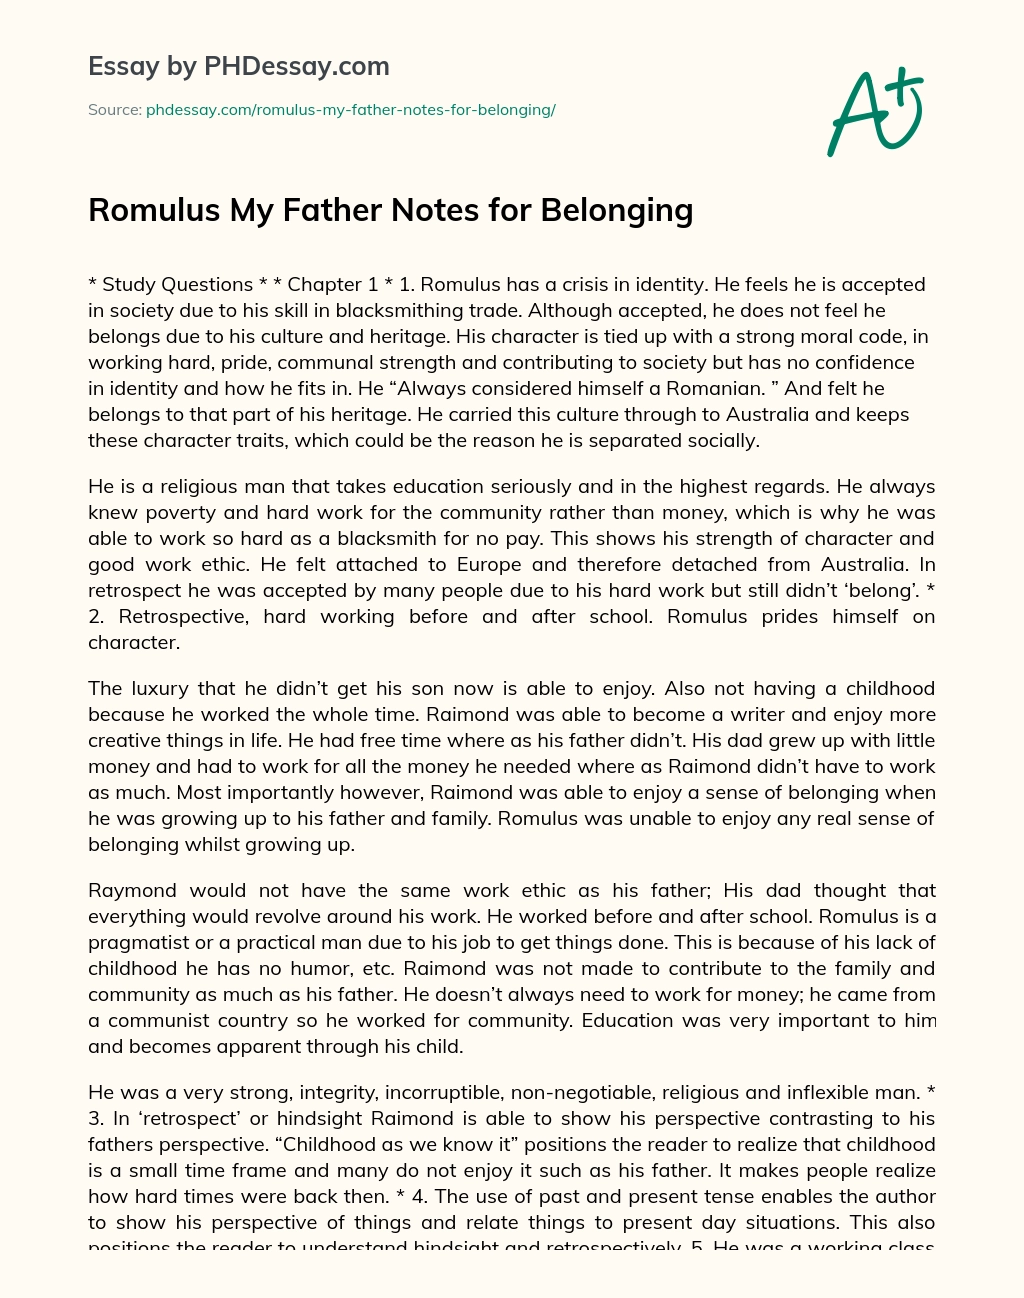 Romulus My Father Notes for Belonging essay